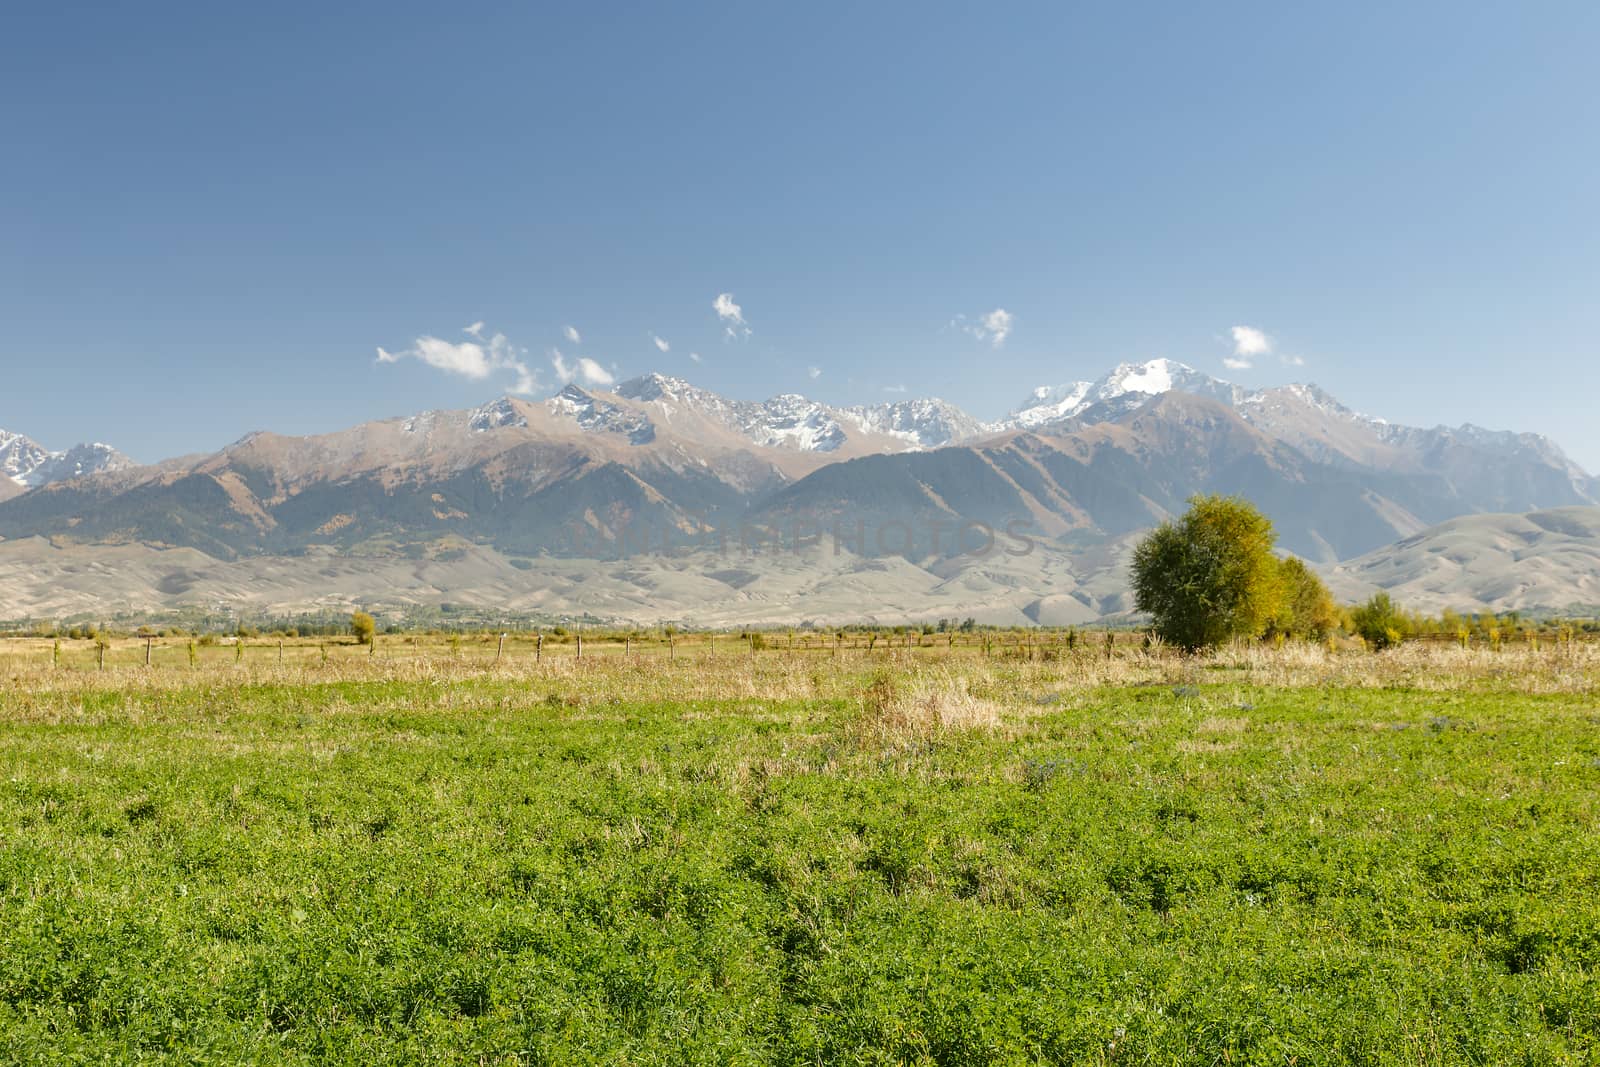 green pastures against the backdrop of snowy mountains near Lake Issyk-Kul by Mieszko9